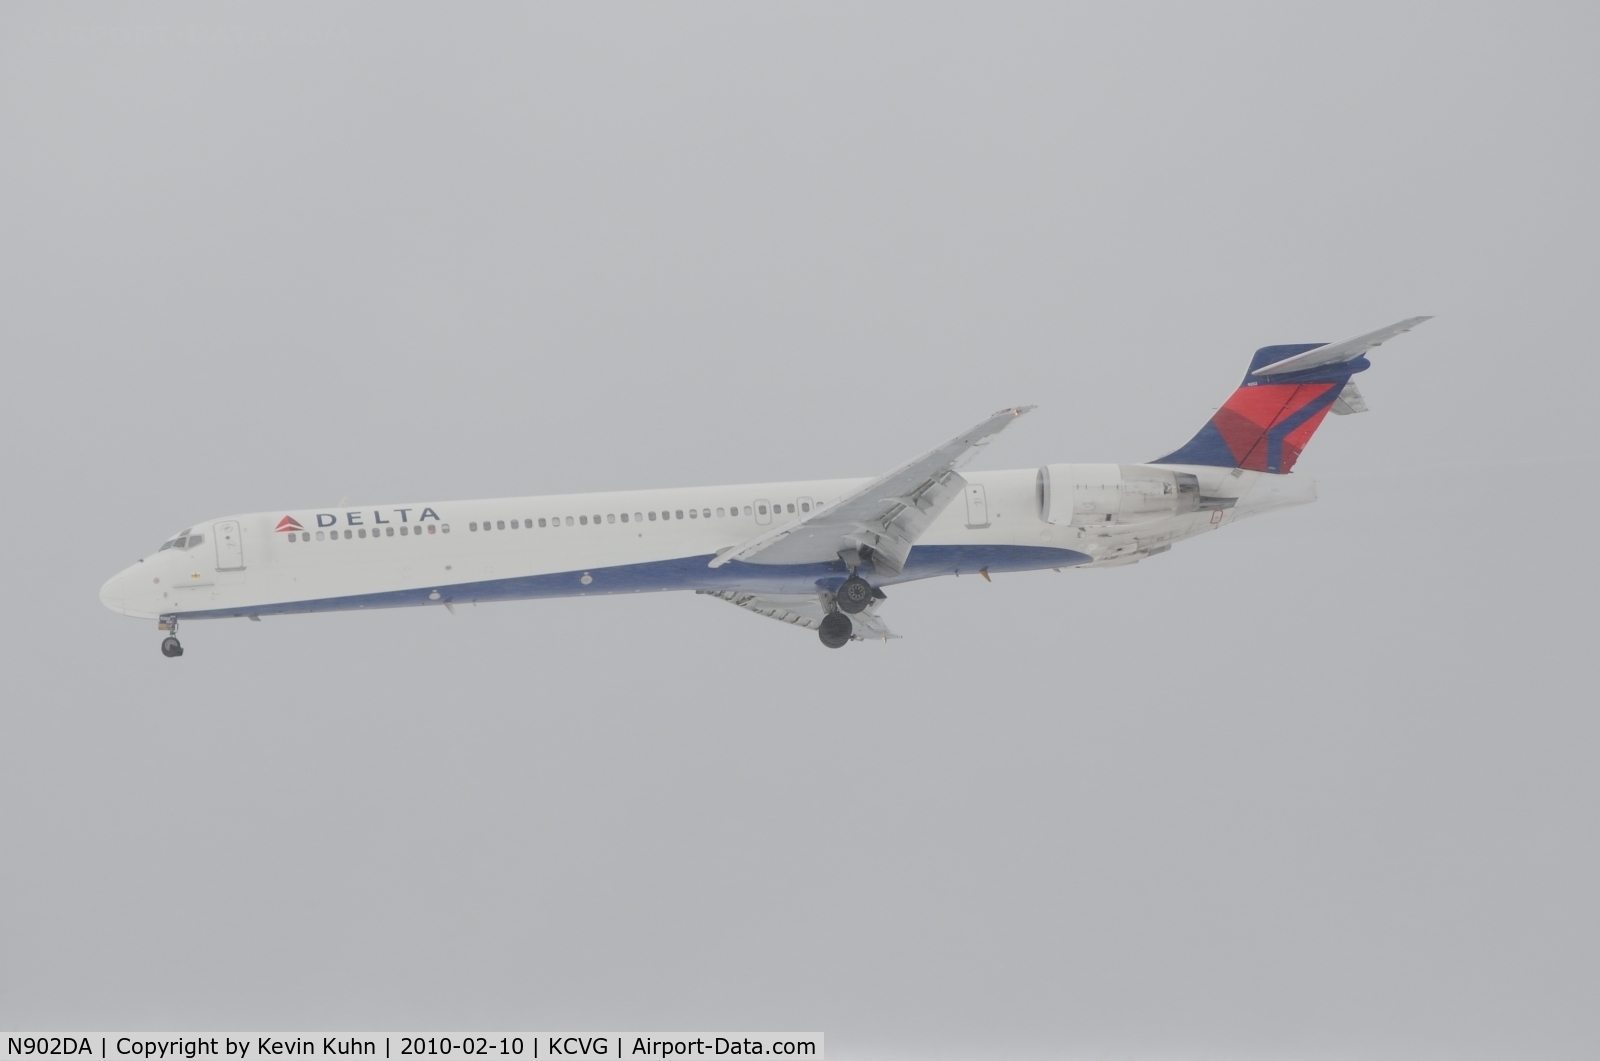 N902DA, 1994 McDonnell Douglas MD-90-30 C/N 53382, Final approach for Rwy 27 in the midst of a winter storm.